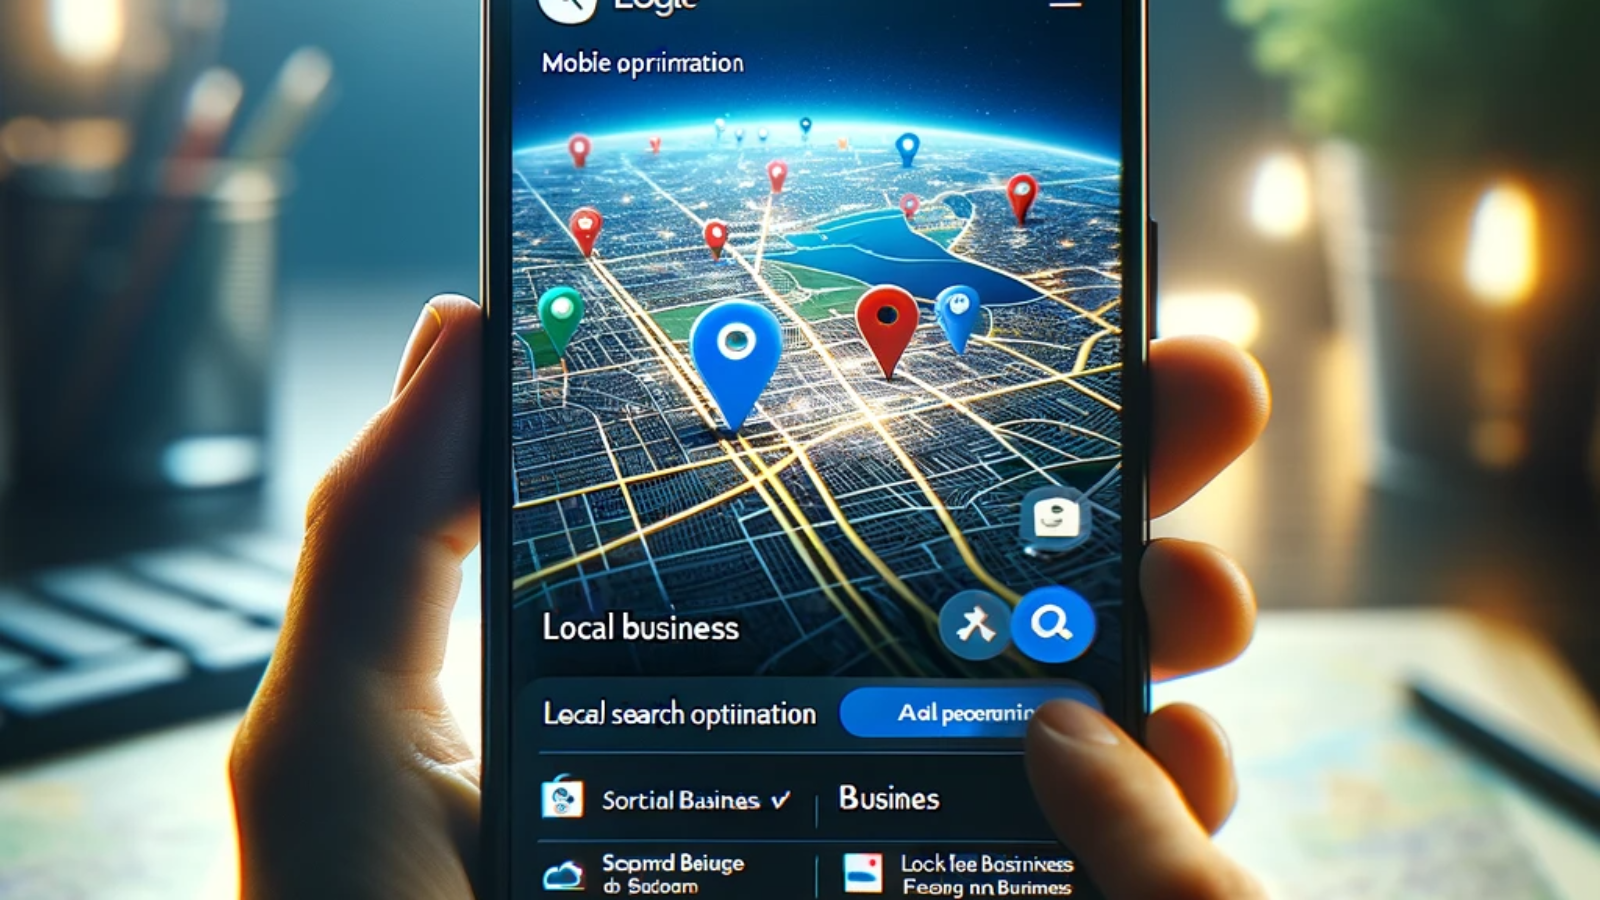 Smartphone displaying a local business listing on a map application.